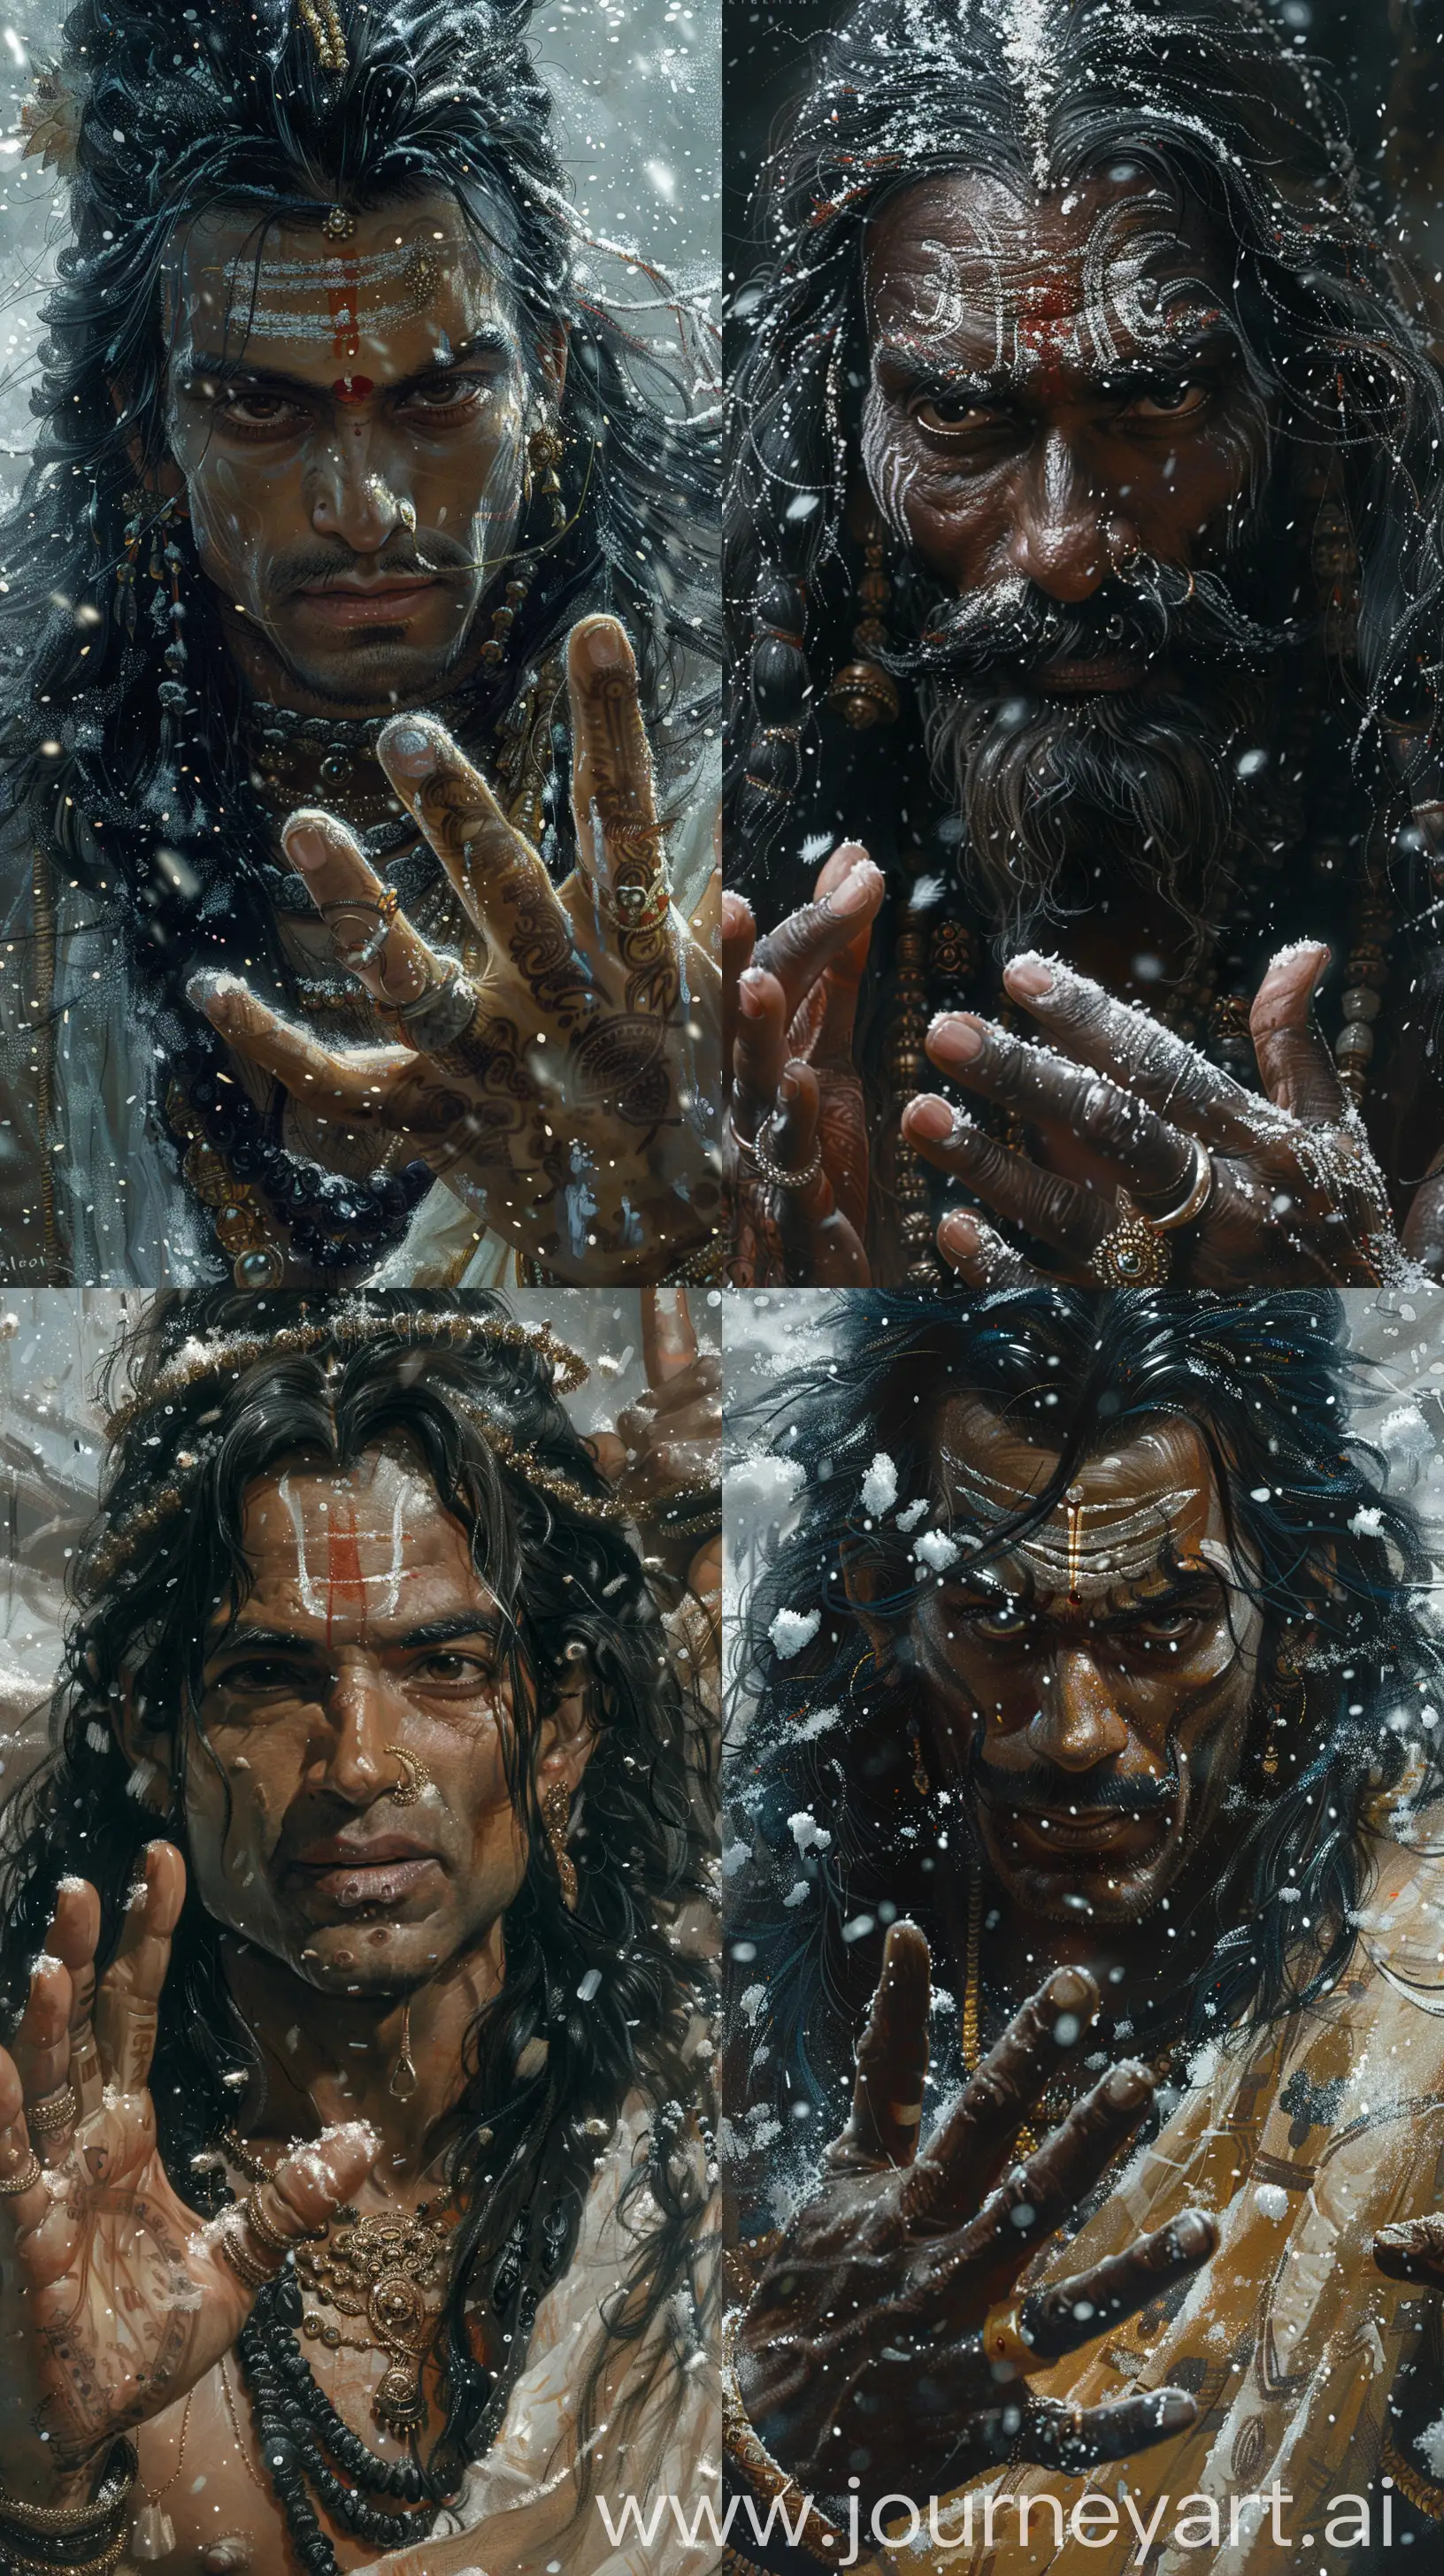 Raj Ravi Varma art style depicting Yamraj, the God of death from Hinduism, in his fifties, with black long hair, pure black complexion, seen as if he's talking, hand gestures, close-up image, intricate details, 8k quality image in snowy ambience --s 300 --ar 9:16 --v 6